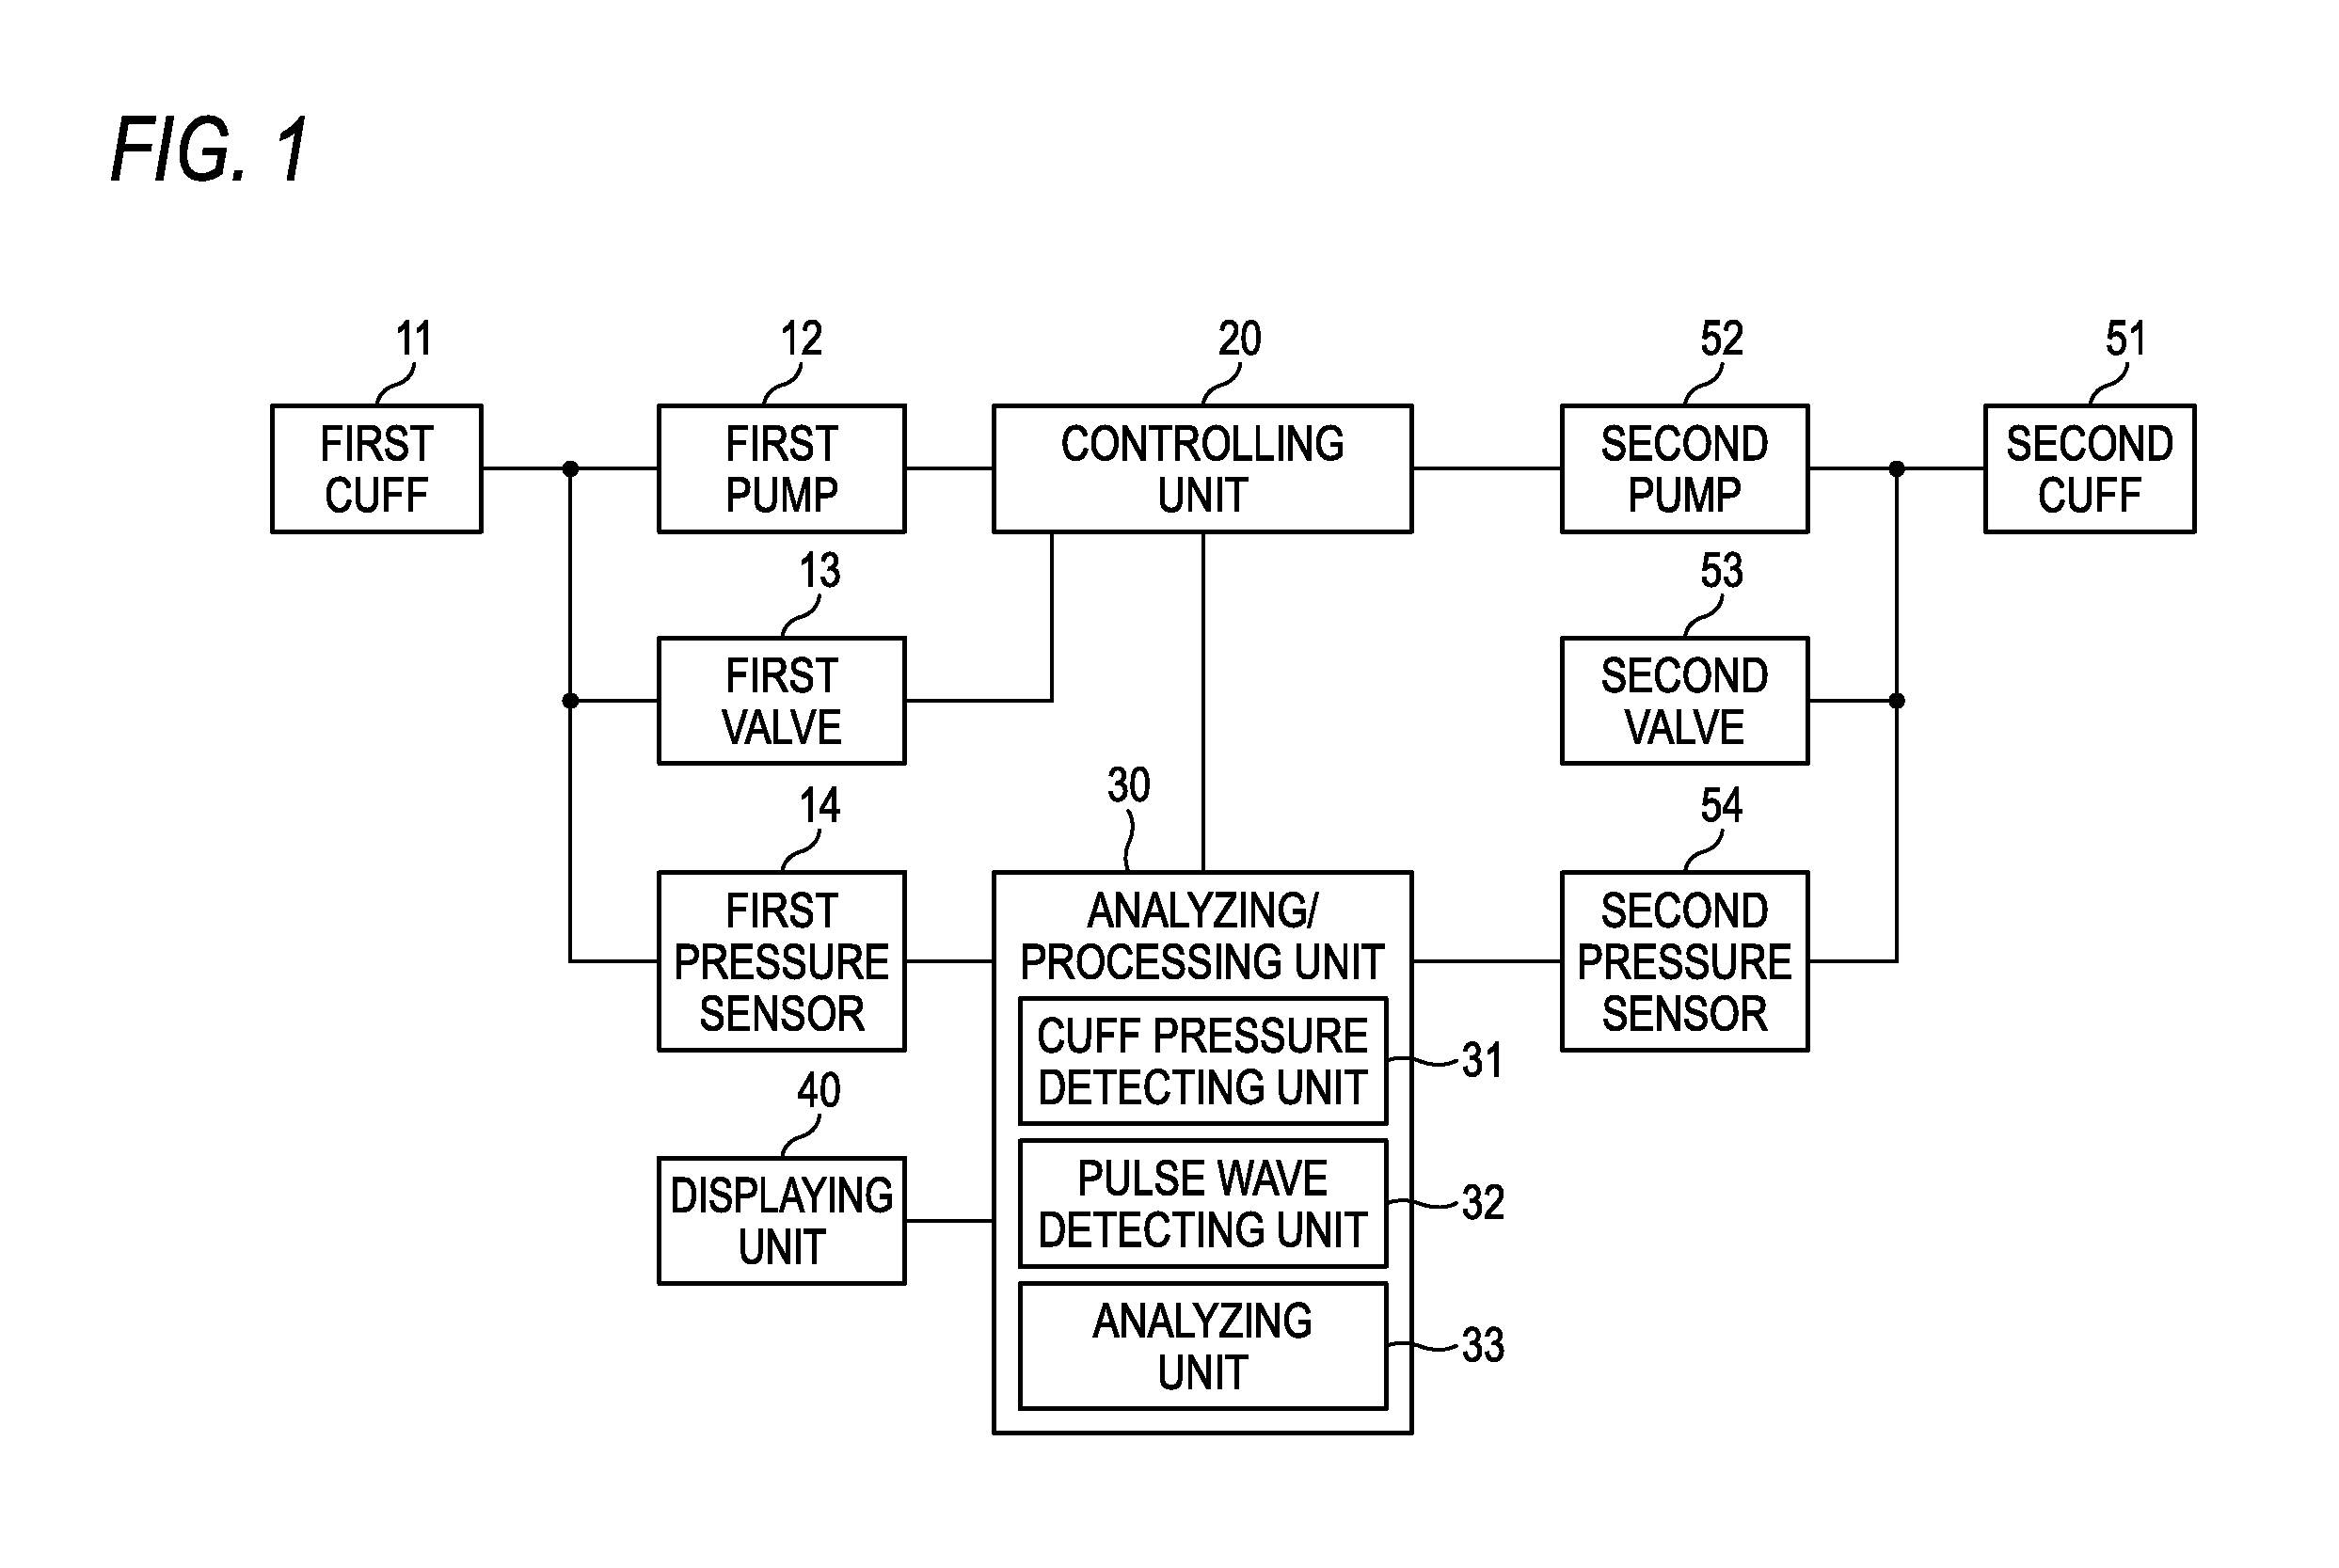 Apparatus for evaluating vascular endothelial function